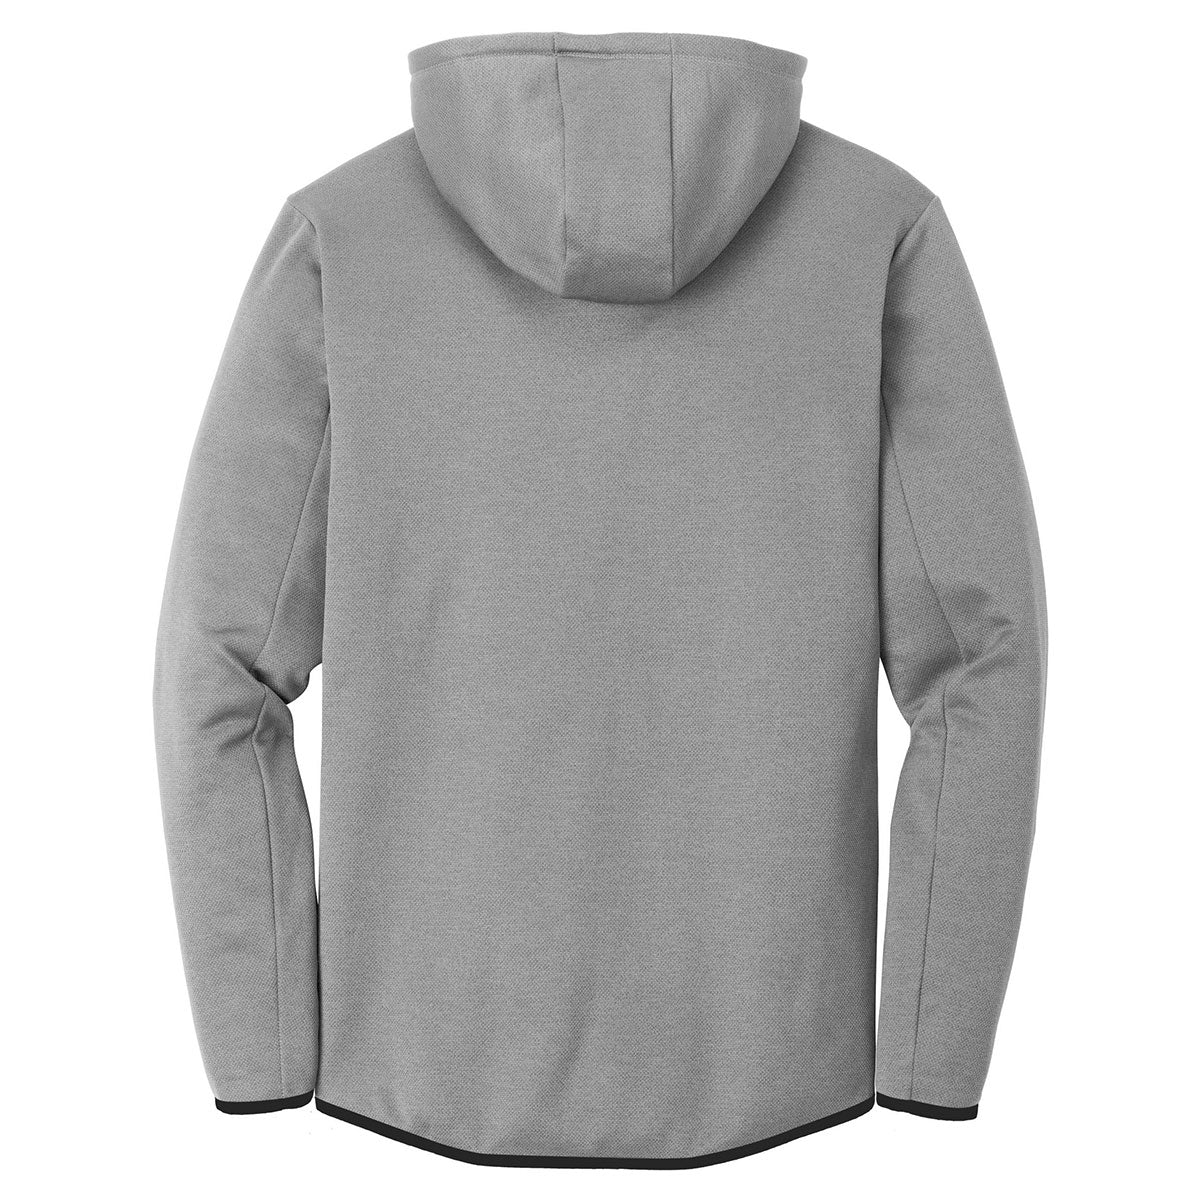 Outlaw Grey Nike Therma-FIT Textured Fleece Full Zip